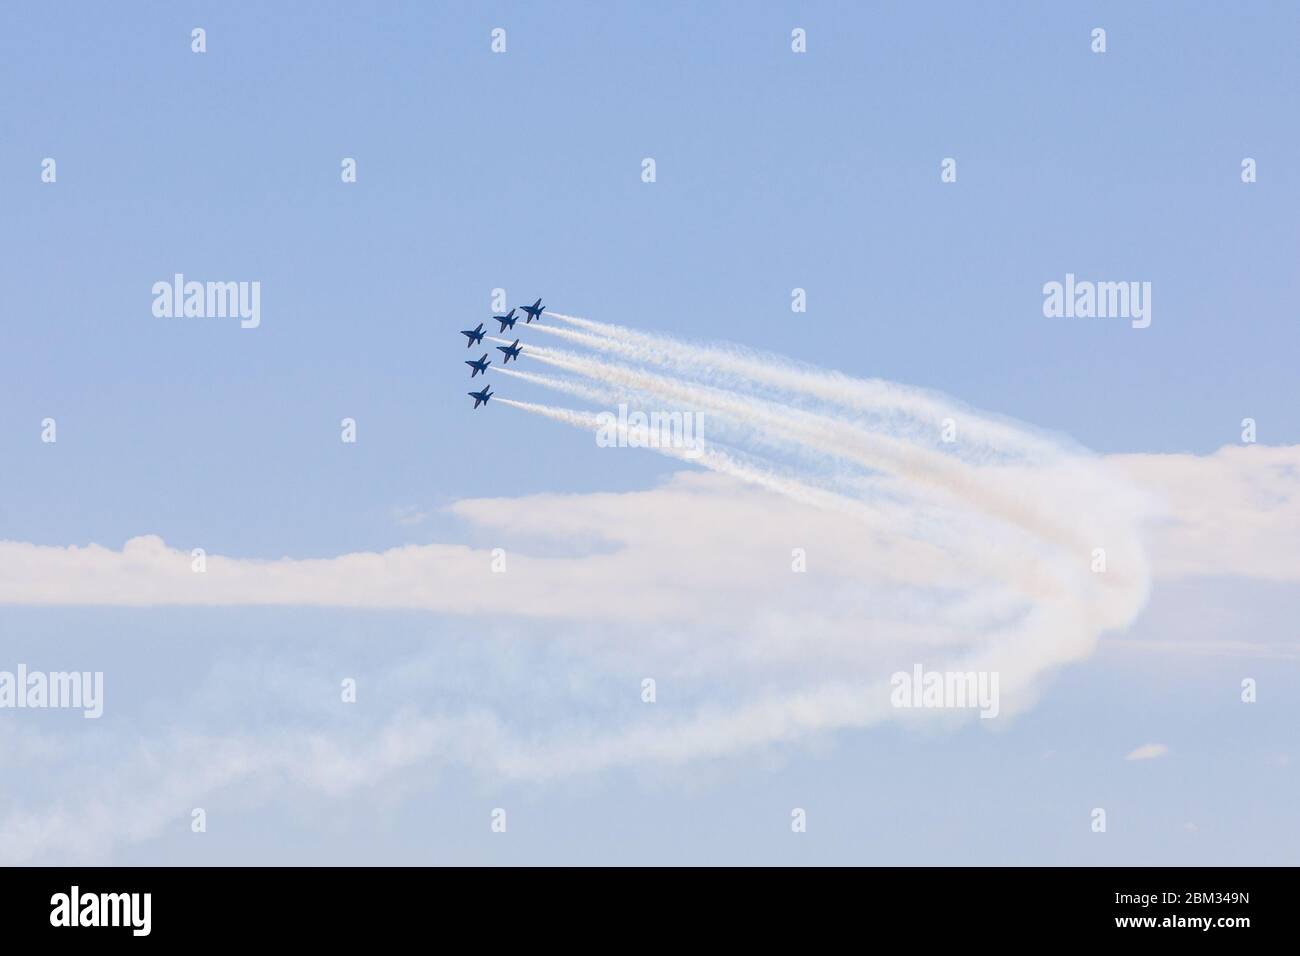 Dallas, USA. 6th May, 2020. A formation of the Blue Angels fly over Dallas and Fort Worth, Texas, the United States, on May 6, 2020. Jets from the U.S. Navy's Blue Angels flew over the southern states of Texas and Louisiana as a way to honor the frontline workers fighting the COVID-19 pandemic. The flyover started around noon in northern Texas Dallas-Fort Worth area and continued south over the largest Texas city of Houston and New Orleans in Louisiana. Credit: Dan Tian/Xinhua/Alamy Live News Stock Photo